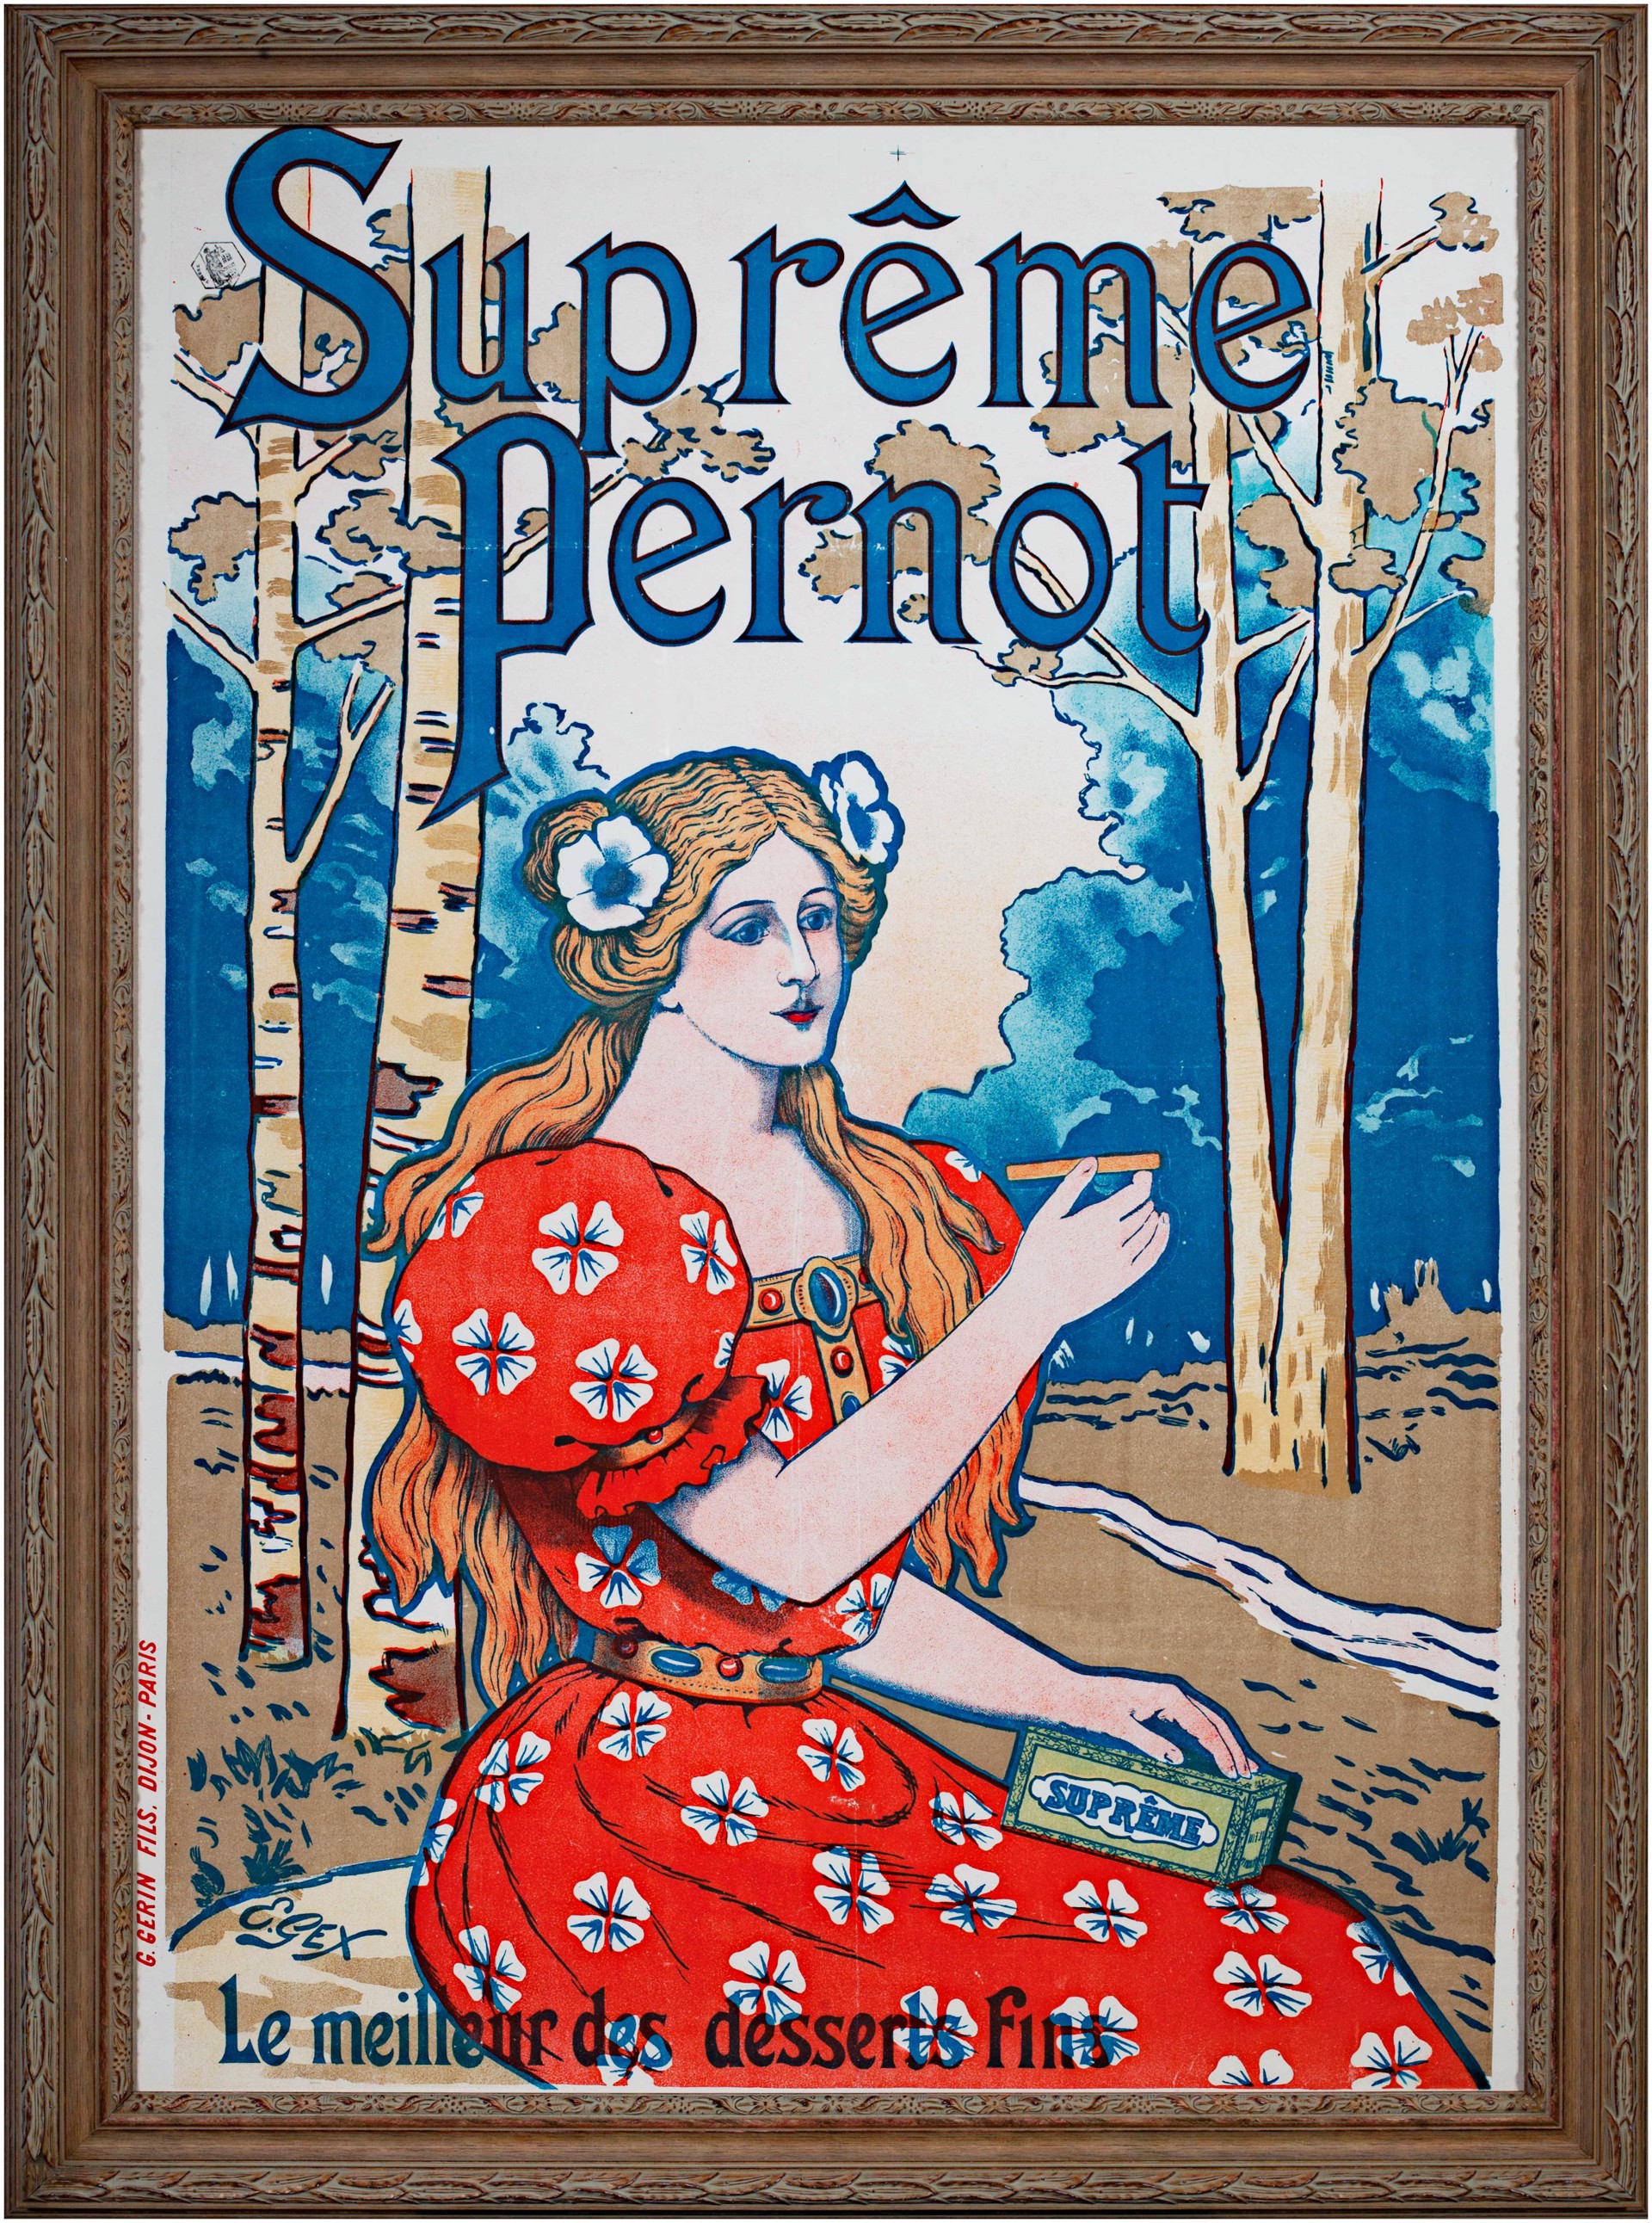 Supreme Pernot by E. Gex